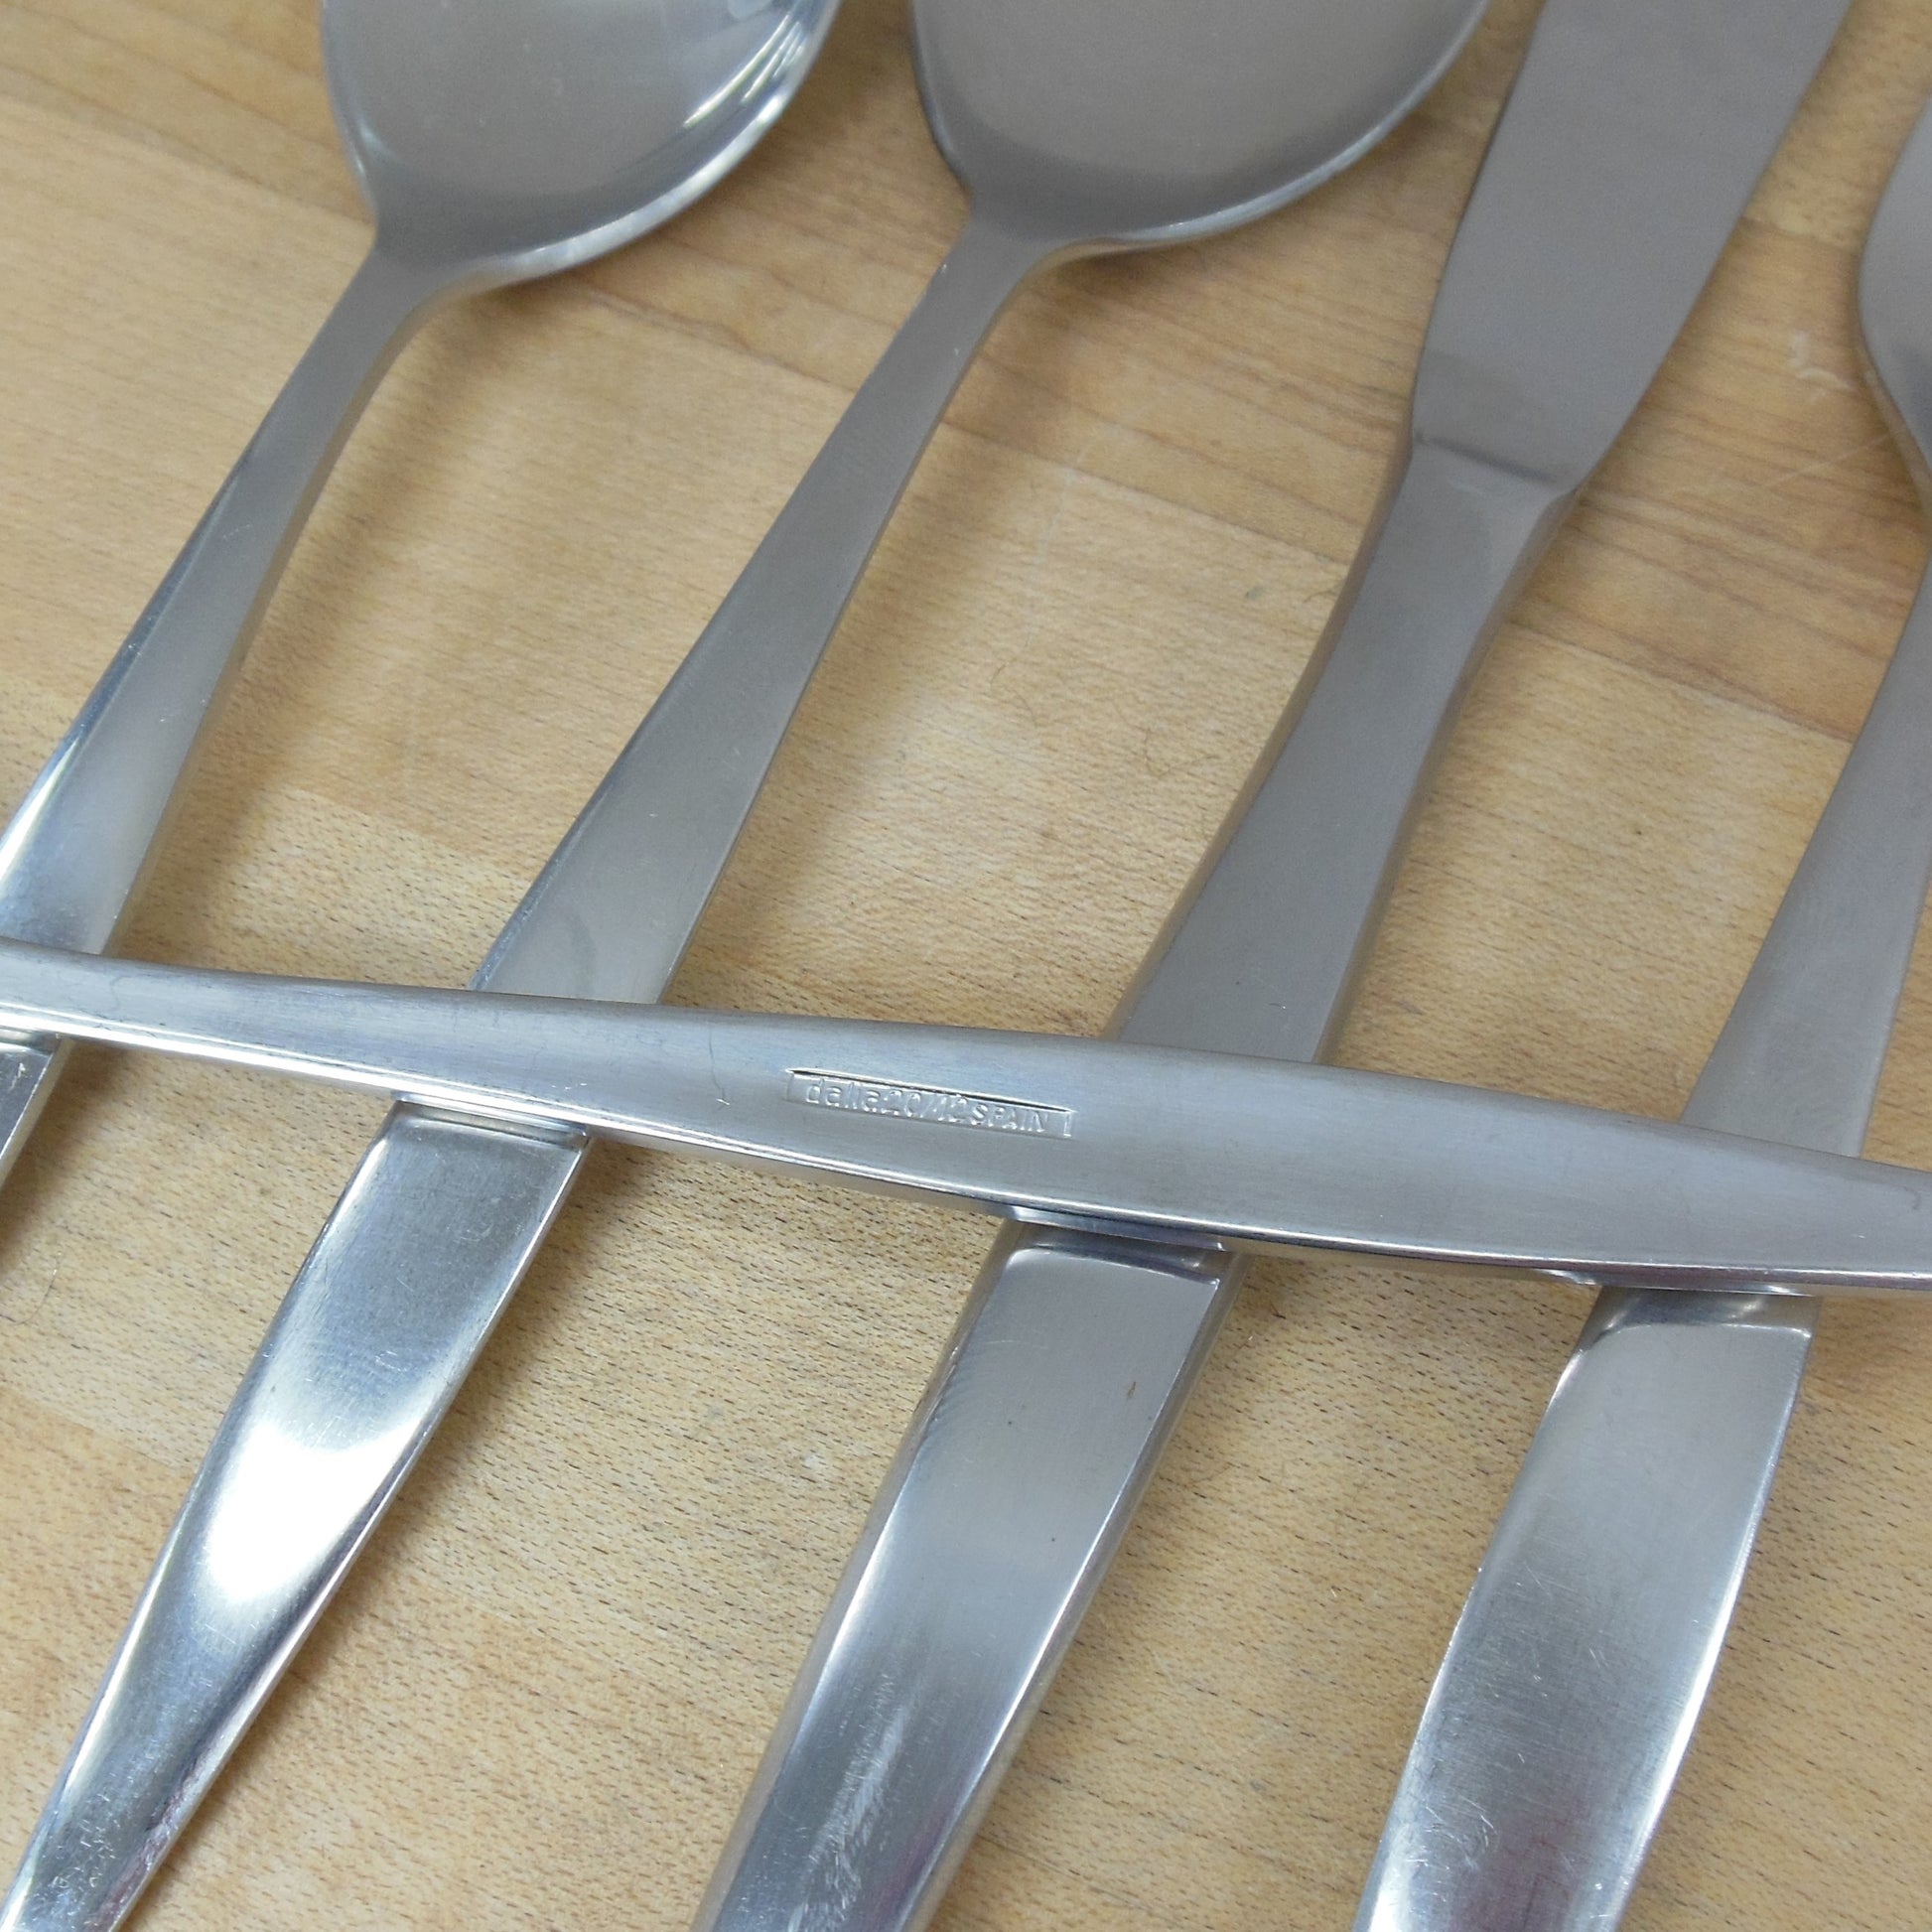 Dalia Spain Braque Modernist Stainless Flatware - 5 Piece Place Setting Used